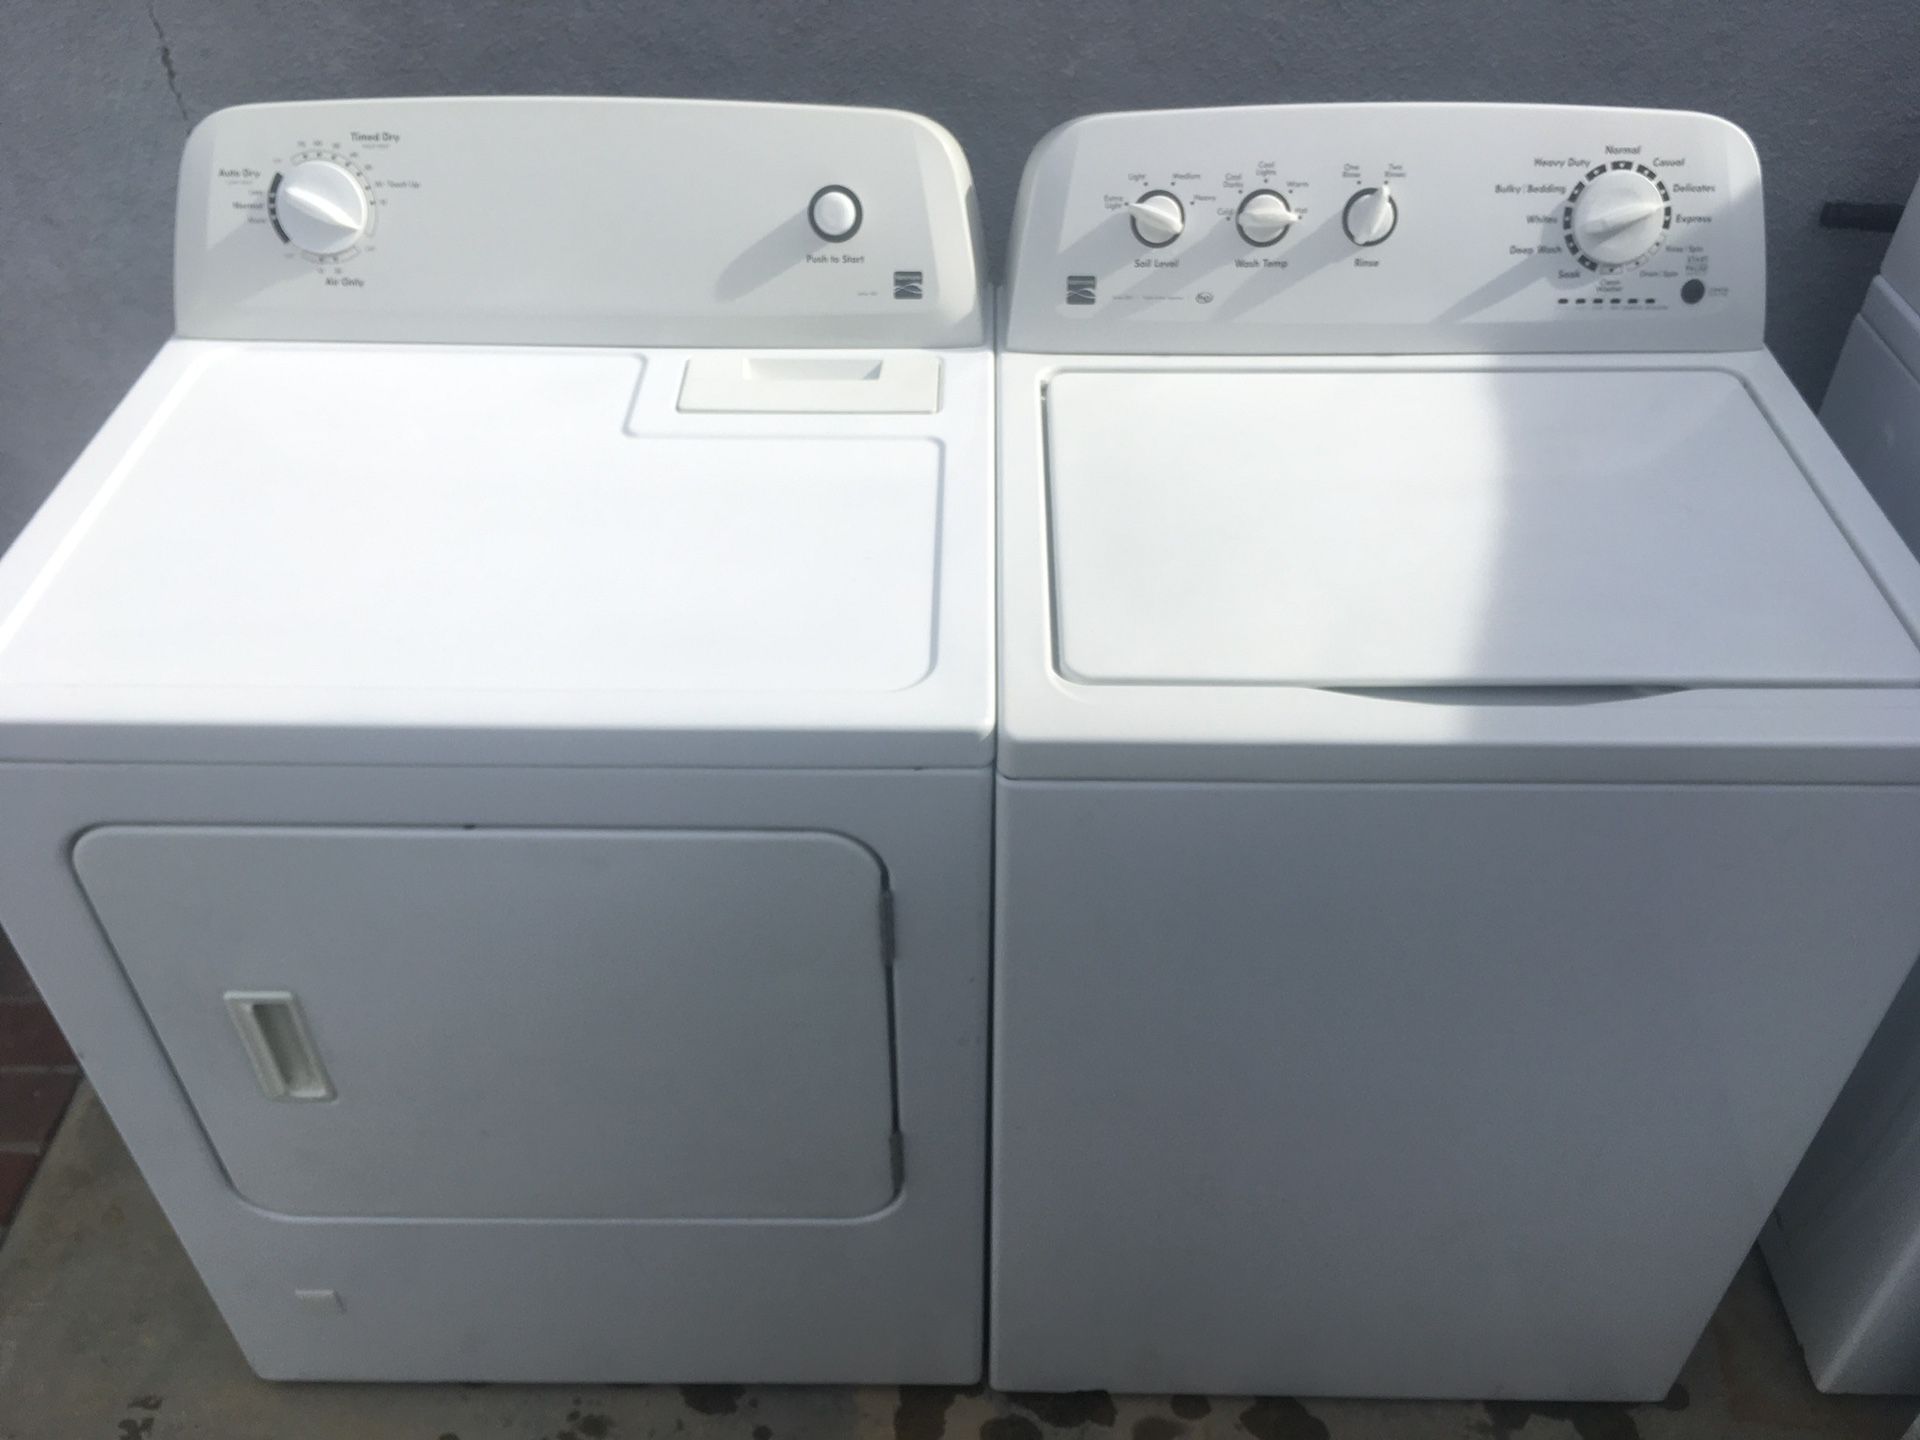 Kenmore HE washer and gas dryer. $325 delivered and installed